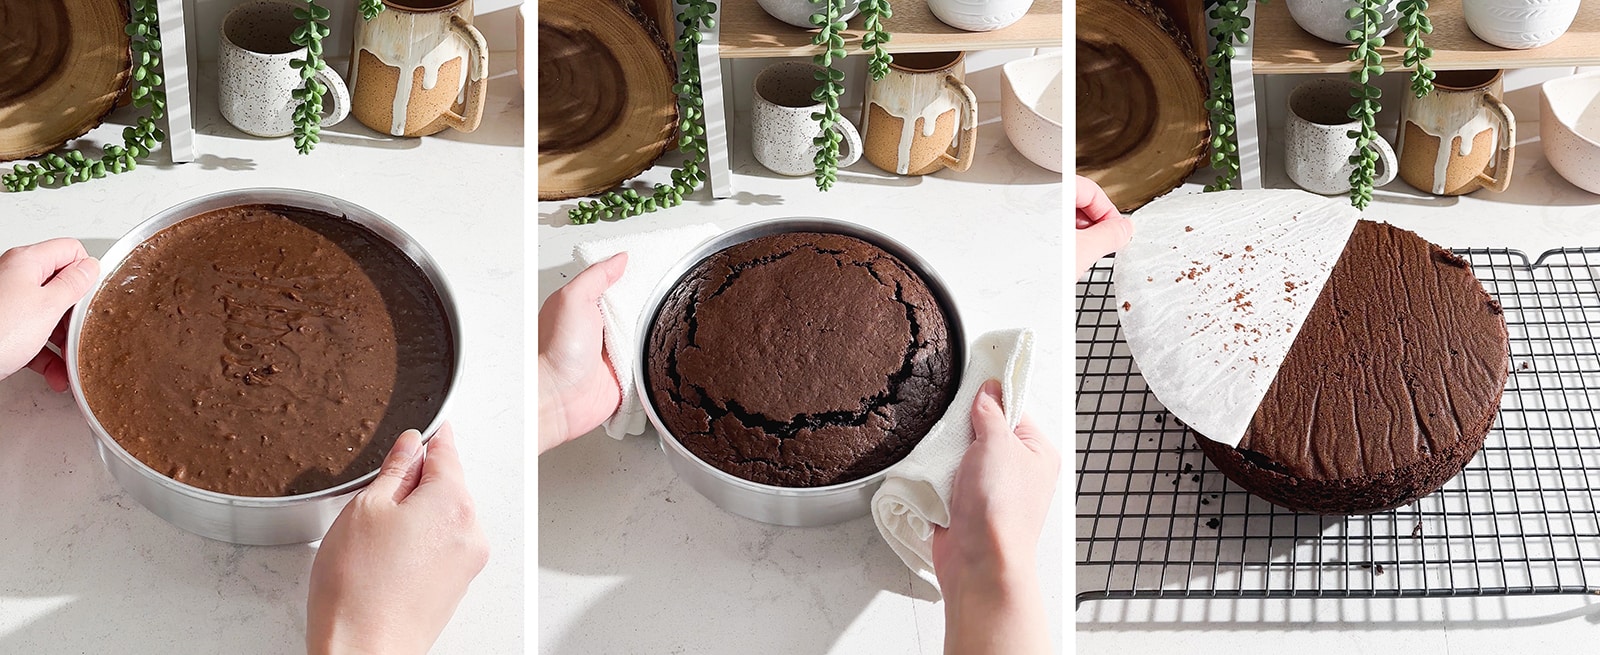 Chocolate cake in a pan before and after baking.